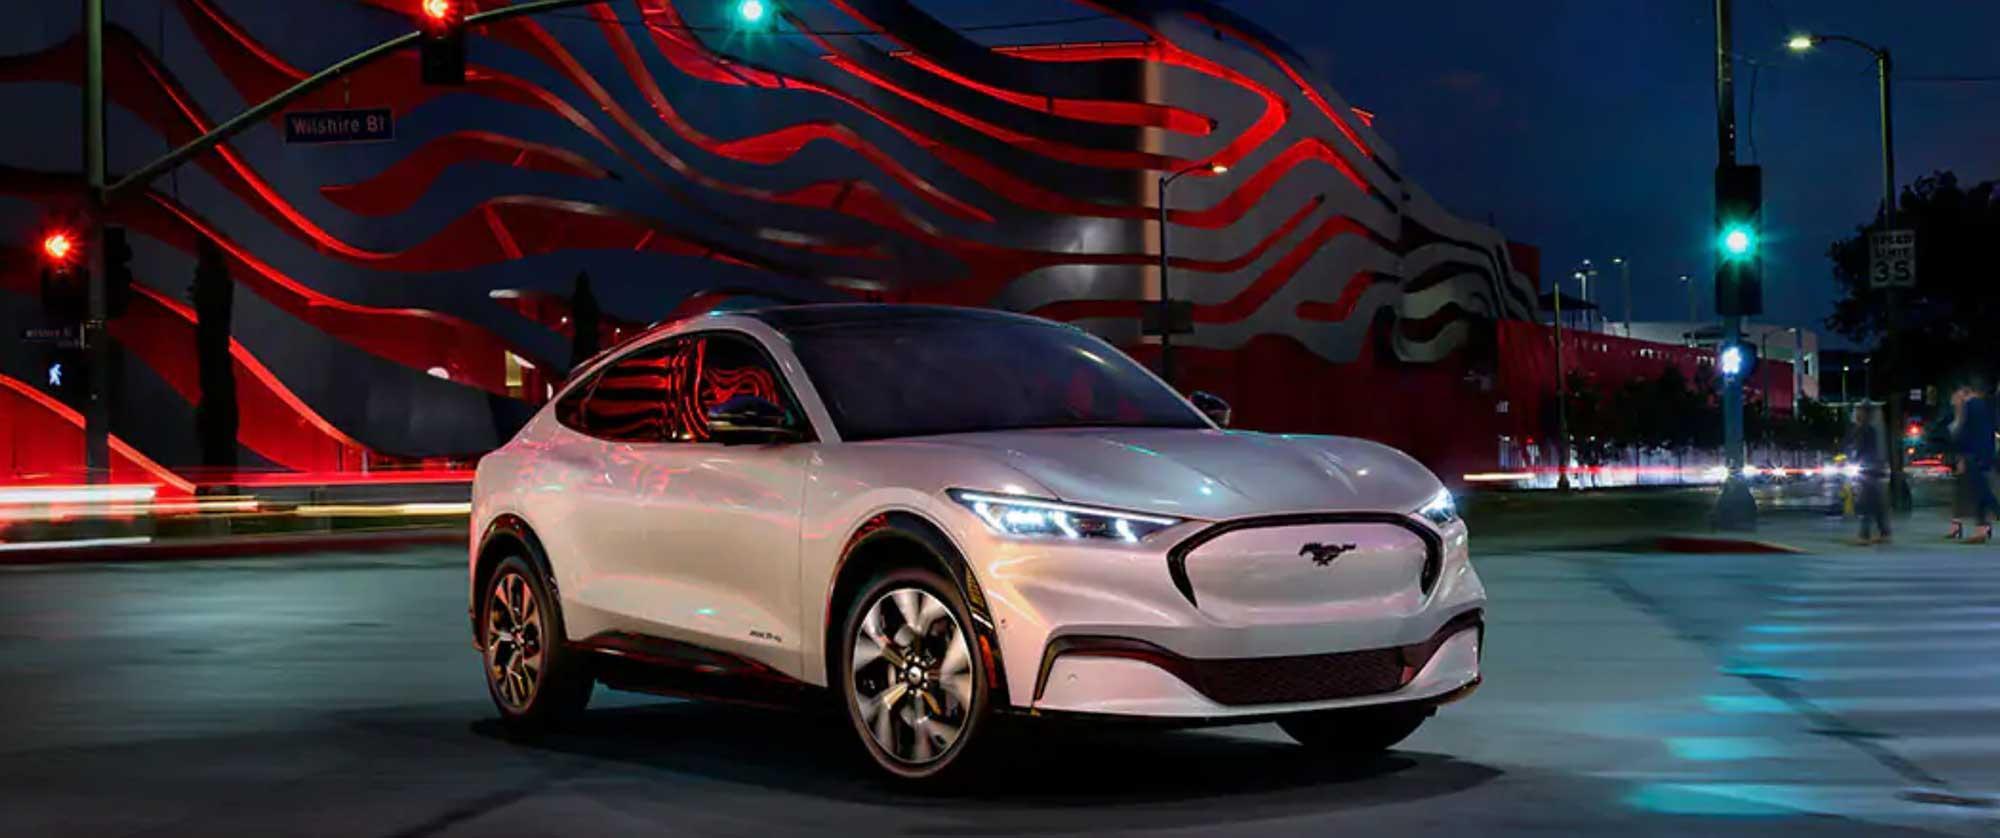 2021 Ford Mustang Electric Suv Price